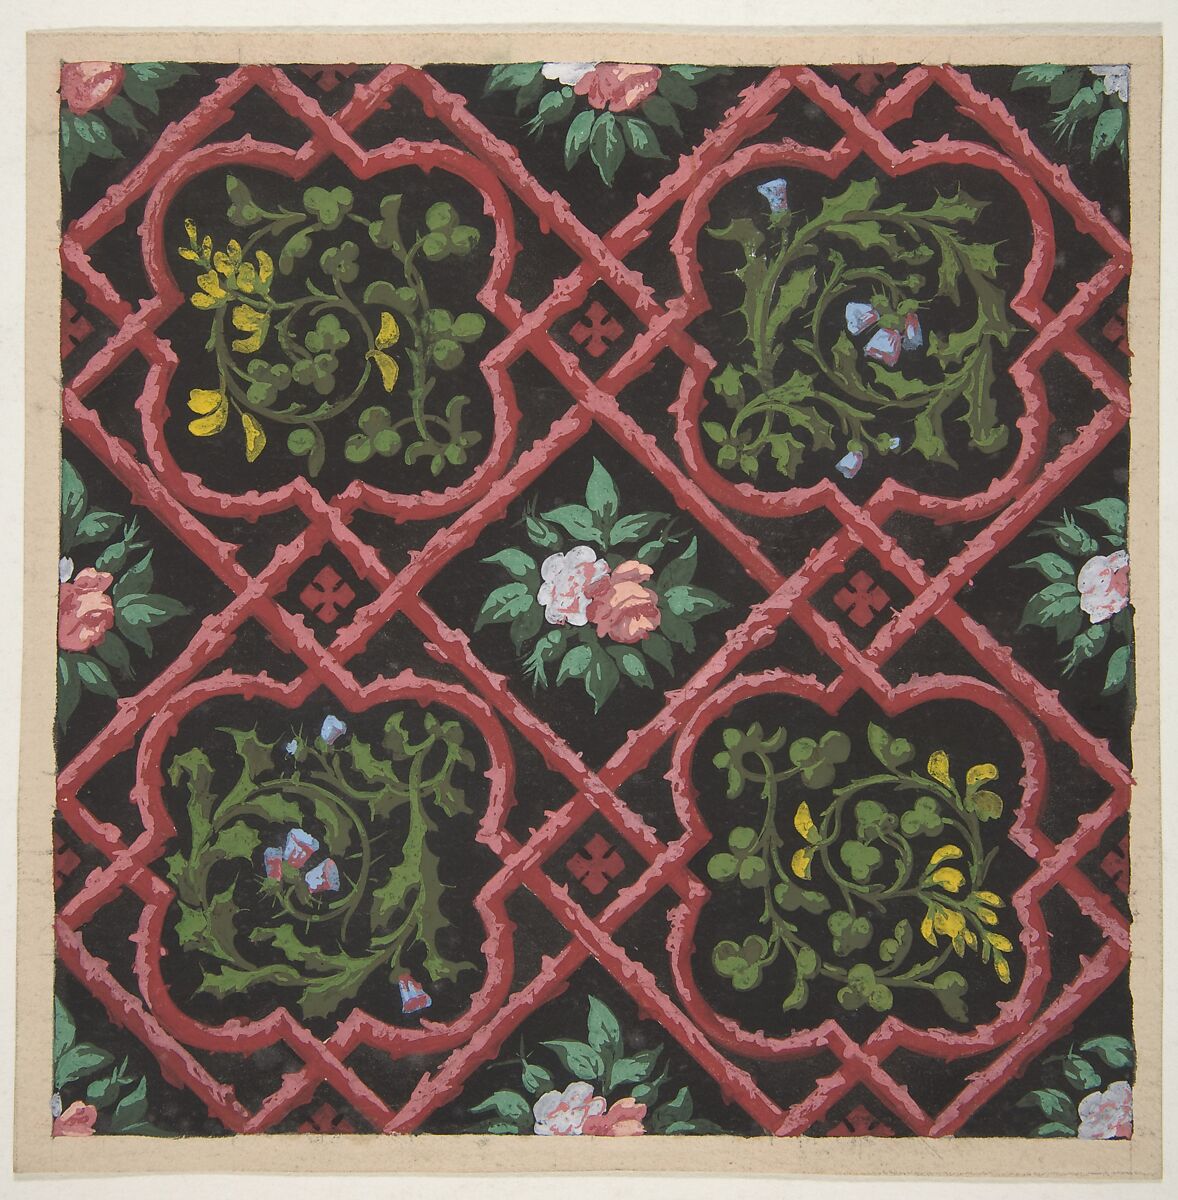 Design for wallpaper featuring flowers and latticework, Jules-Edmond-Charles Lachaise (French, died 1897), Gouache on wove paper 